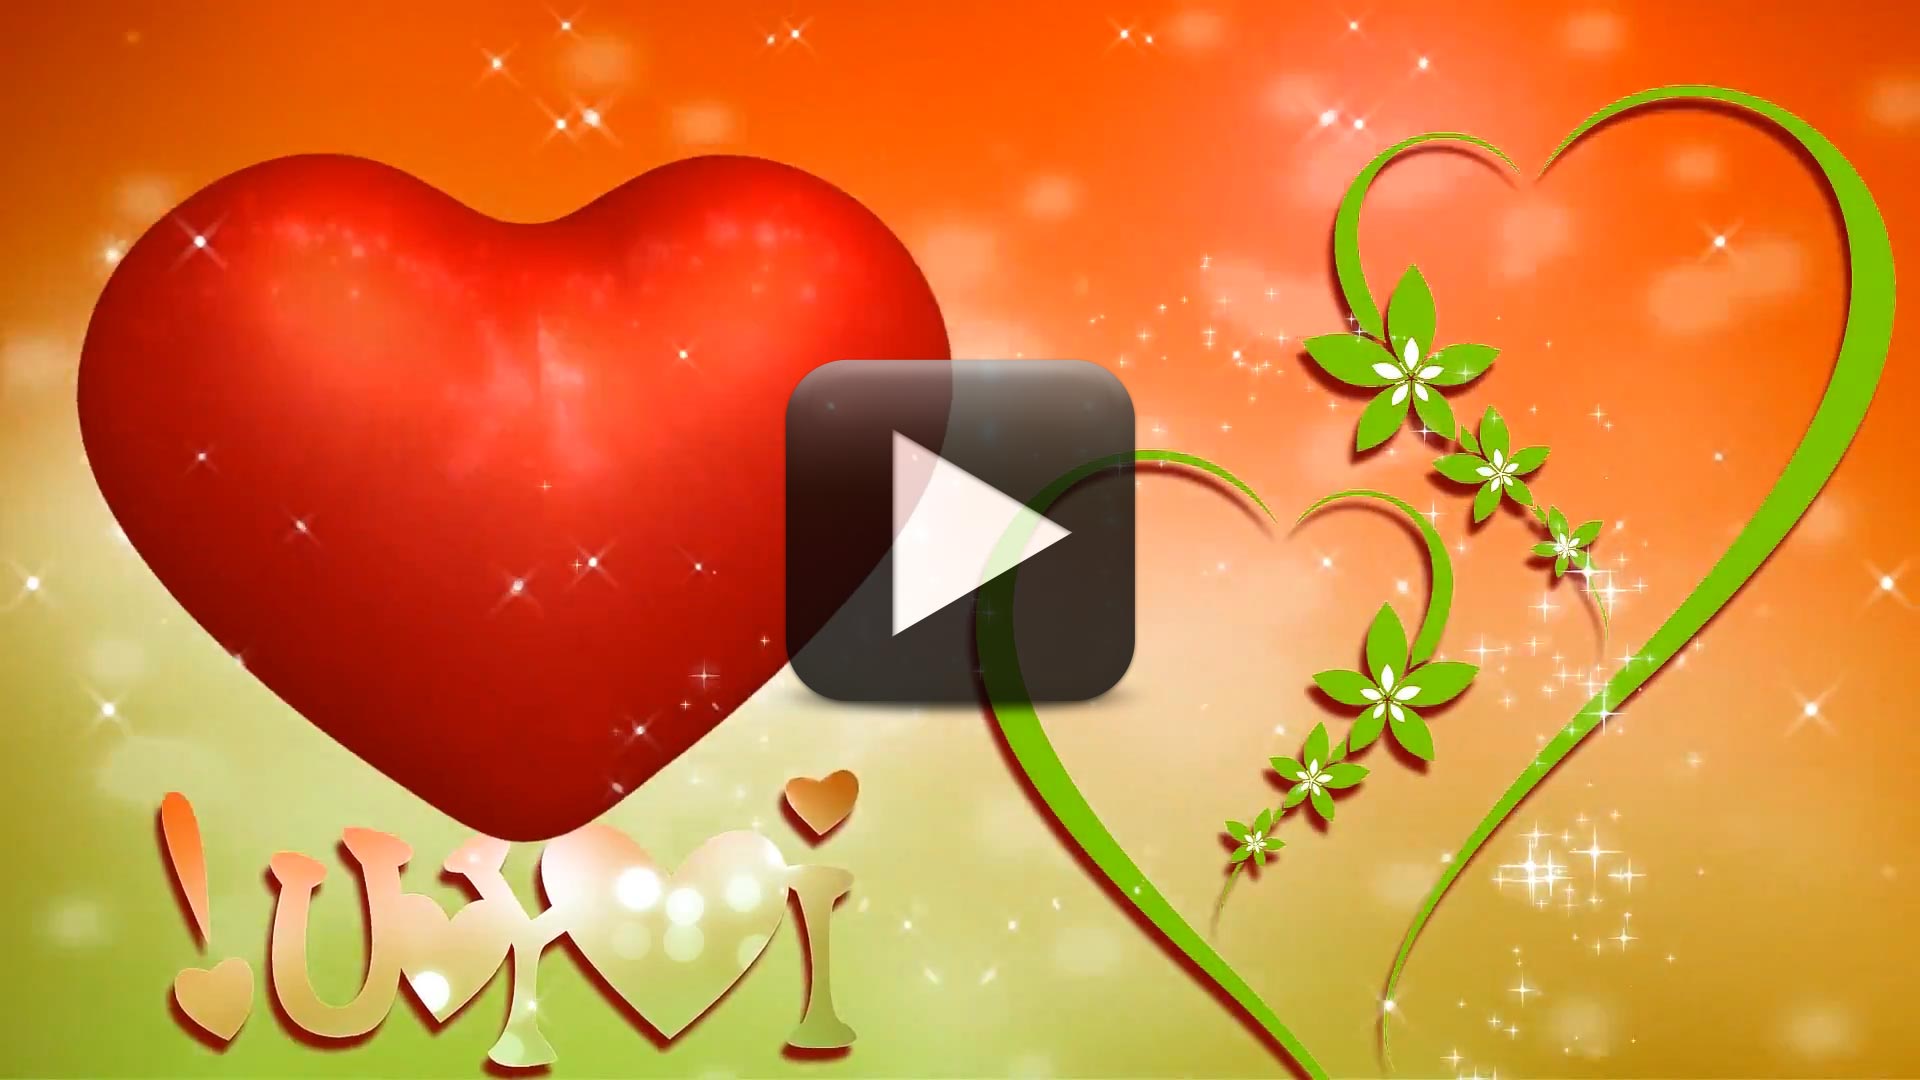 Wedding Motion Backgrounds-Love Heart Animation | All Design Creative